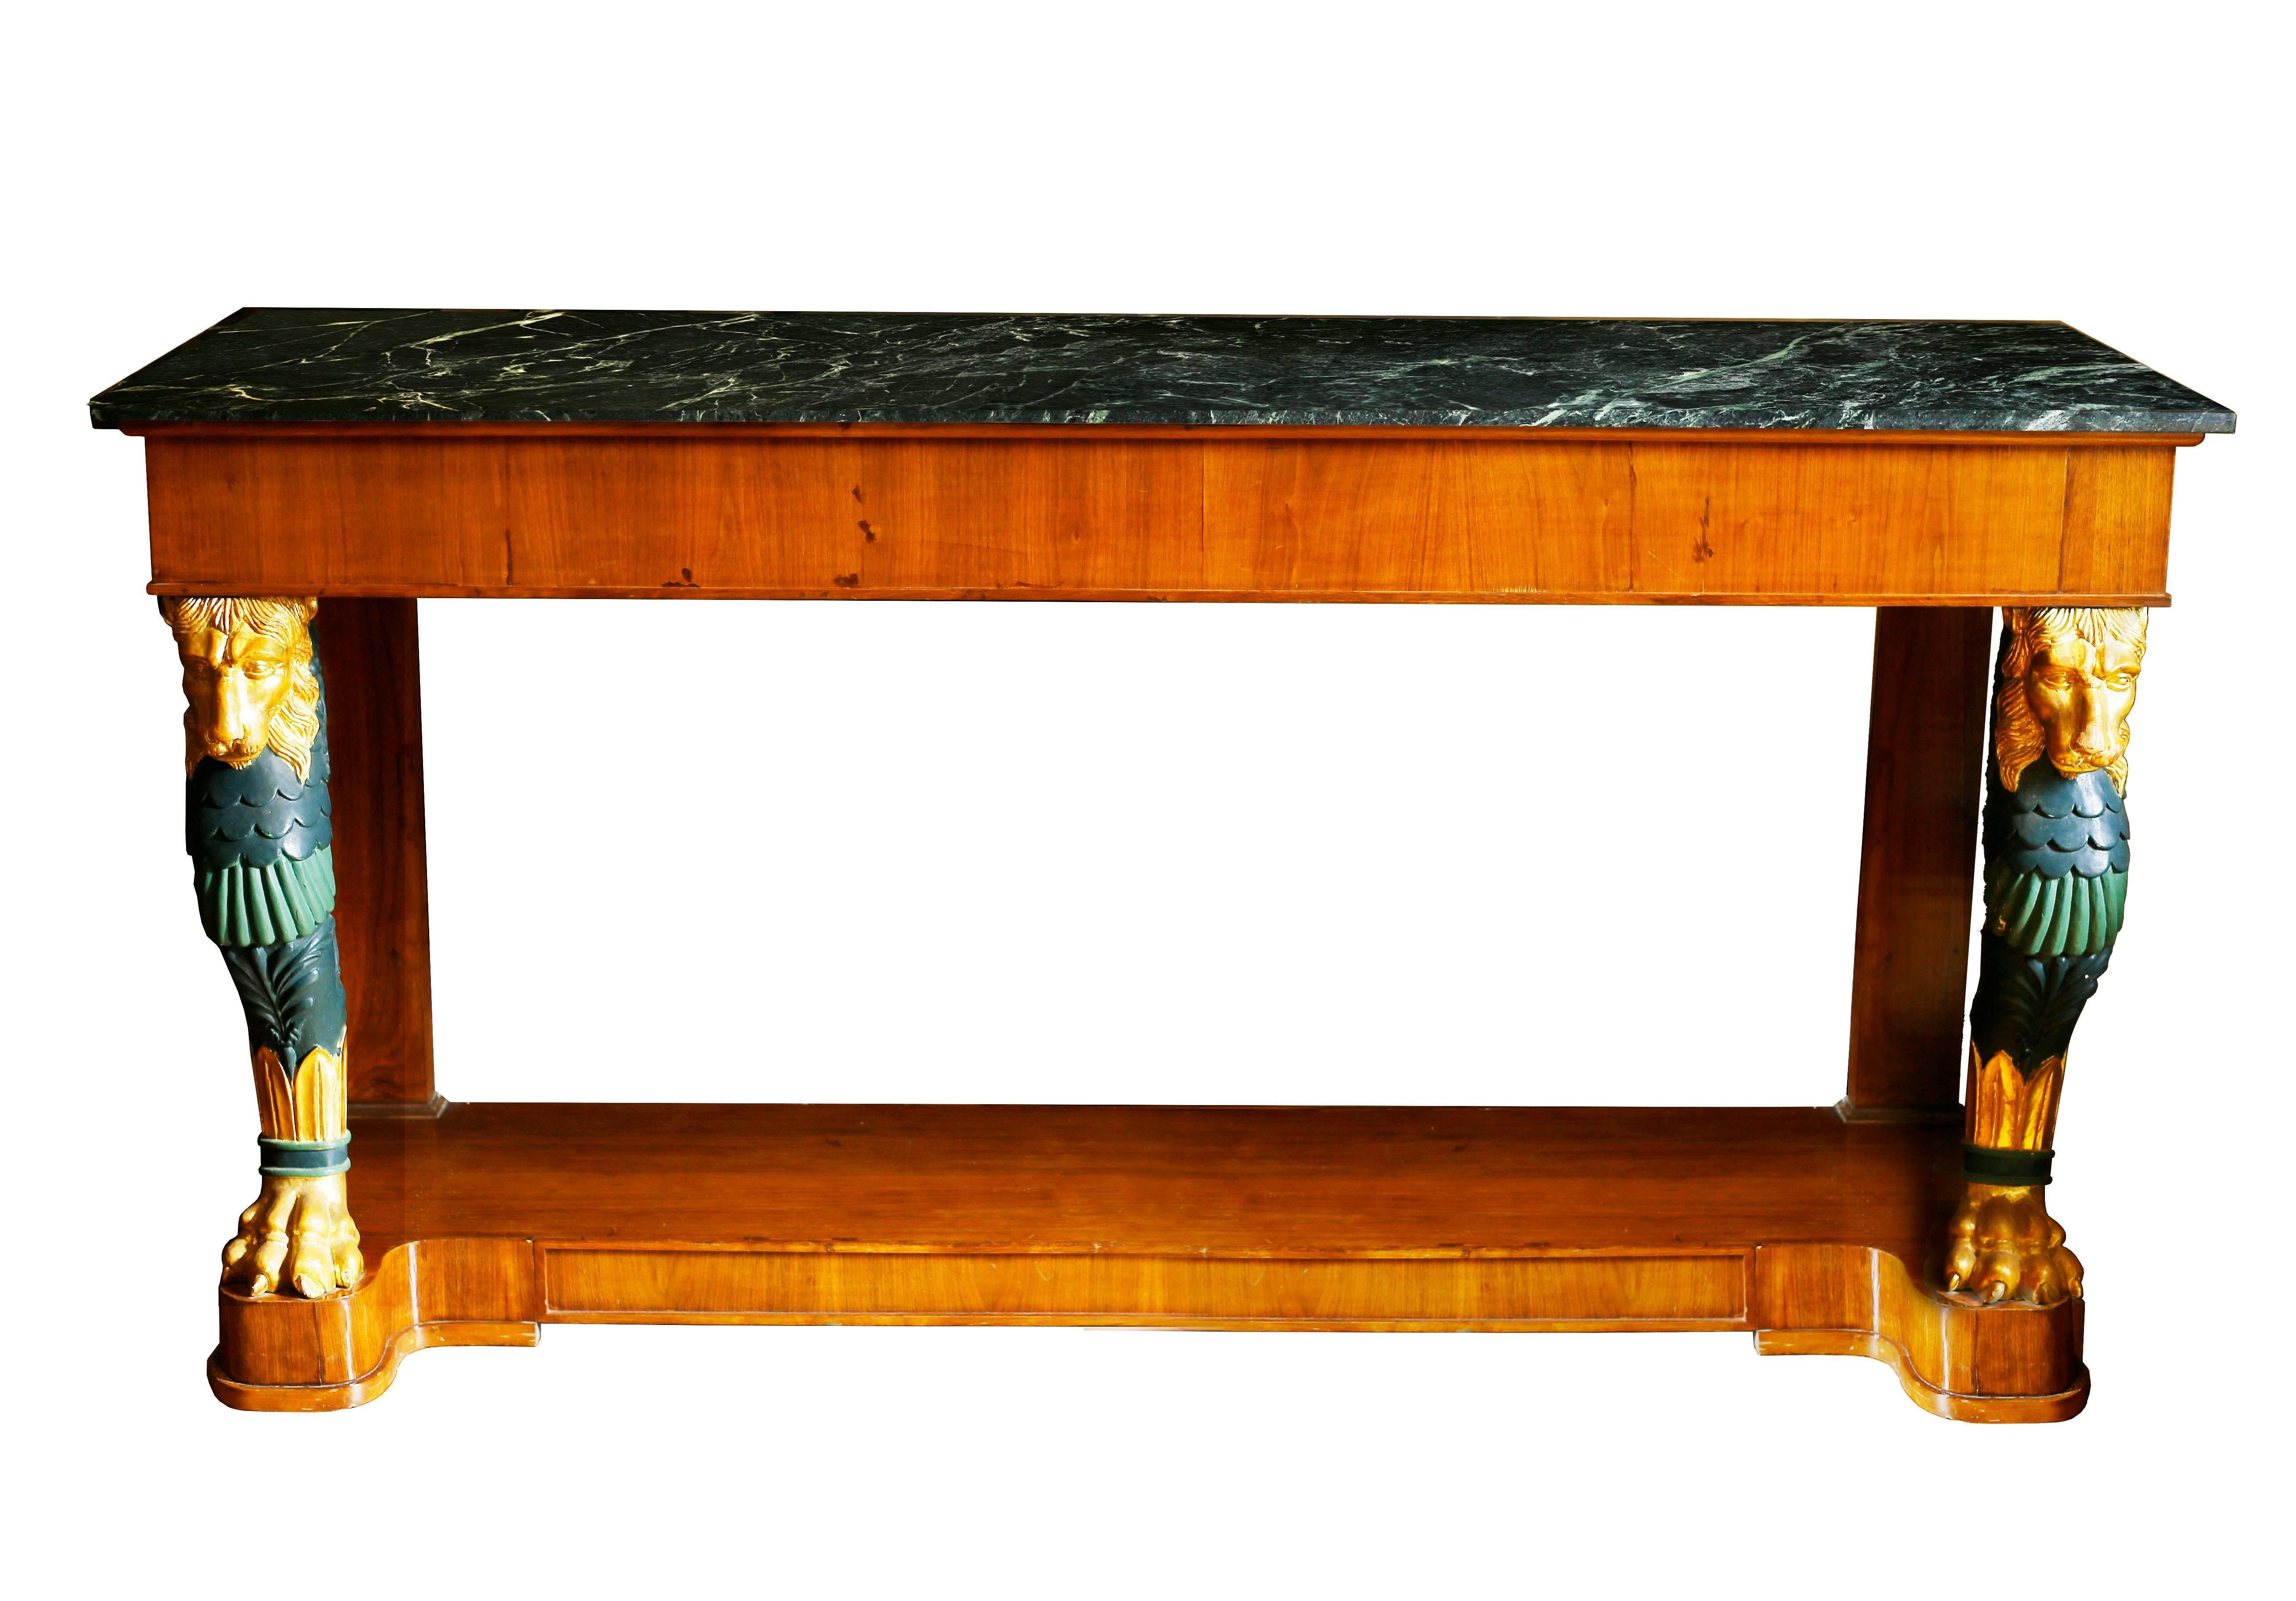 A stunning set of grand midcentury consoles with large lion supports in the style of Charles Percier, Thomas Hope, and George Smith. These classical tables take their inspiration from the French Empire and English Regency designers that infused